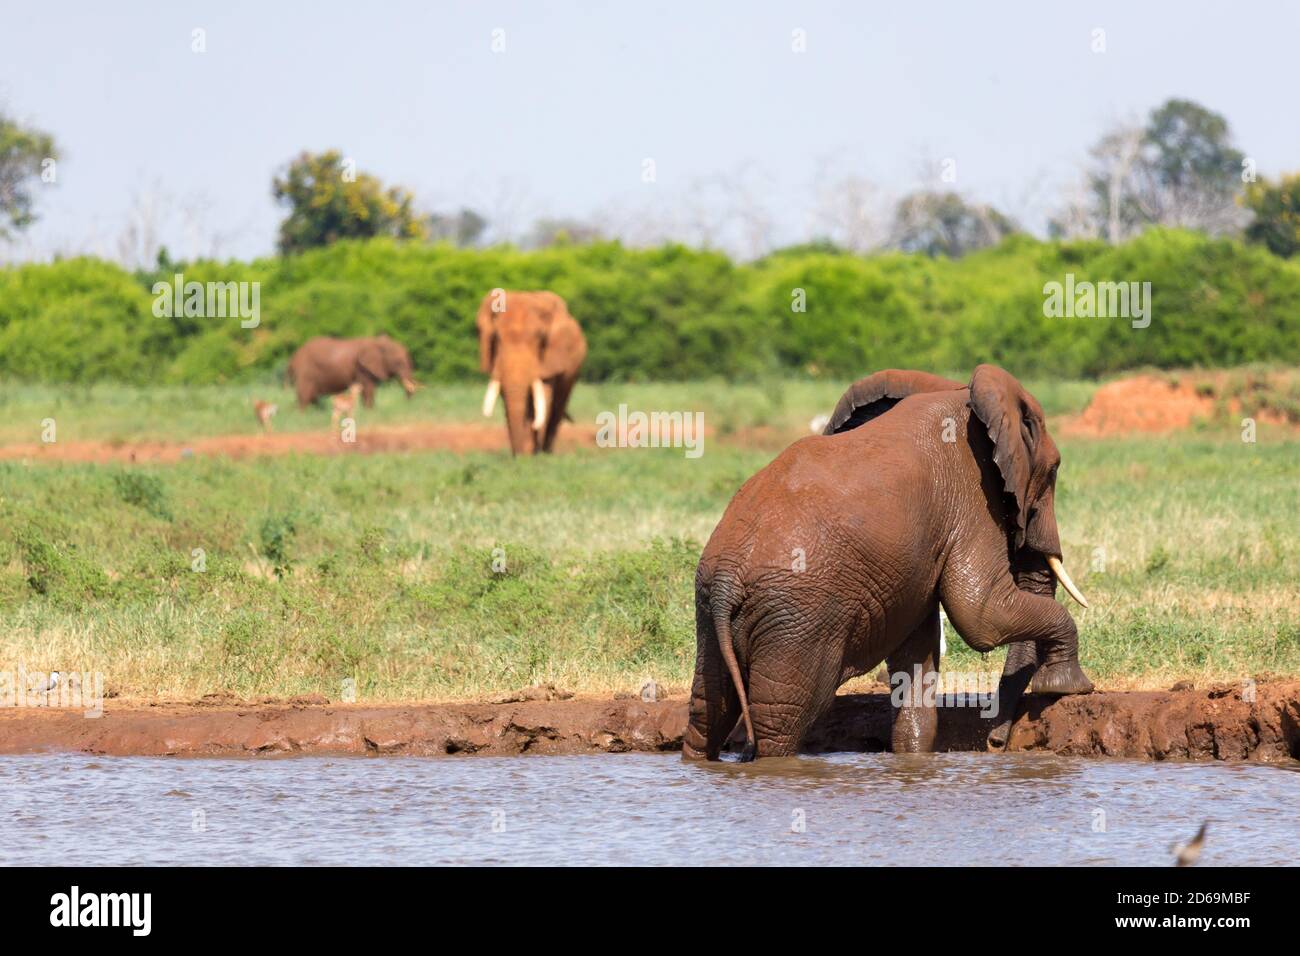 The red elephants bathe in a water hole in the middle of the savannah. Stock Photo